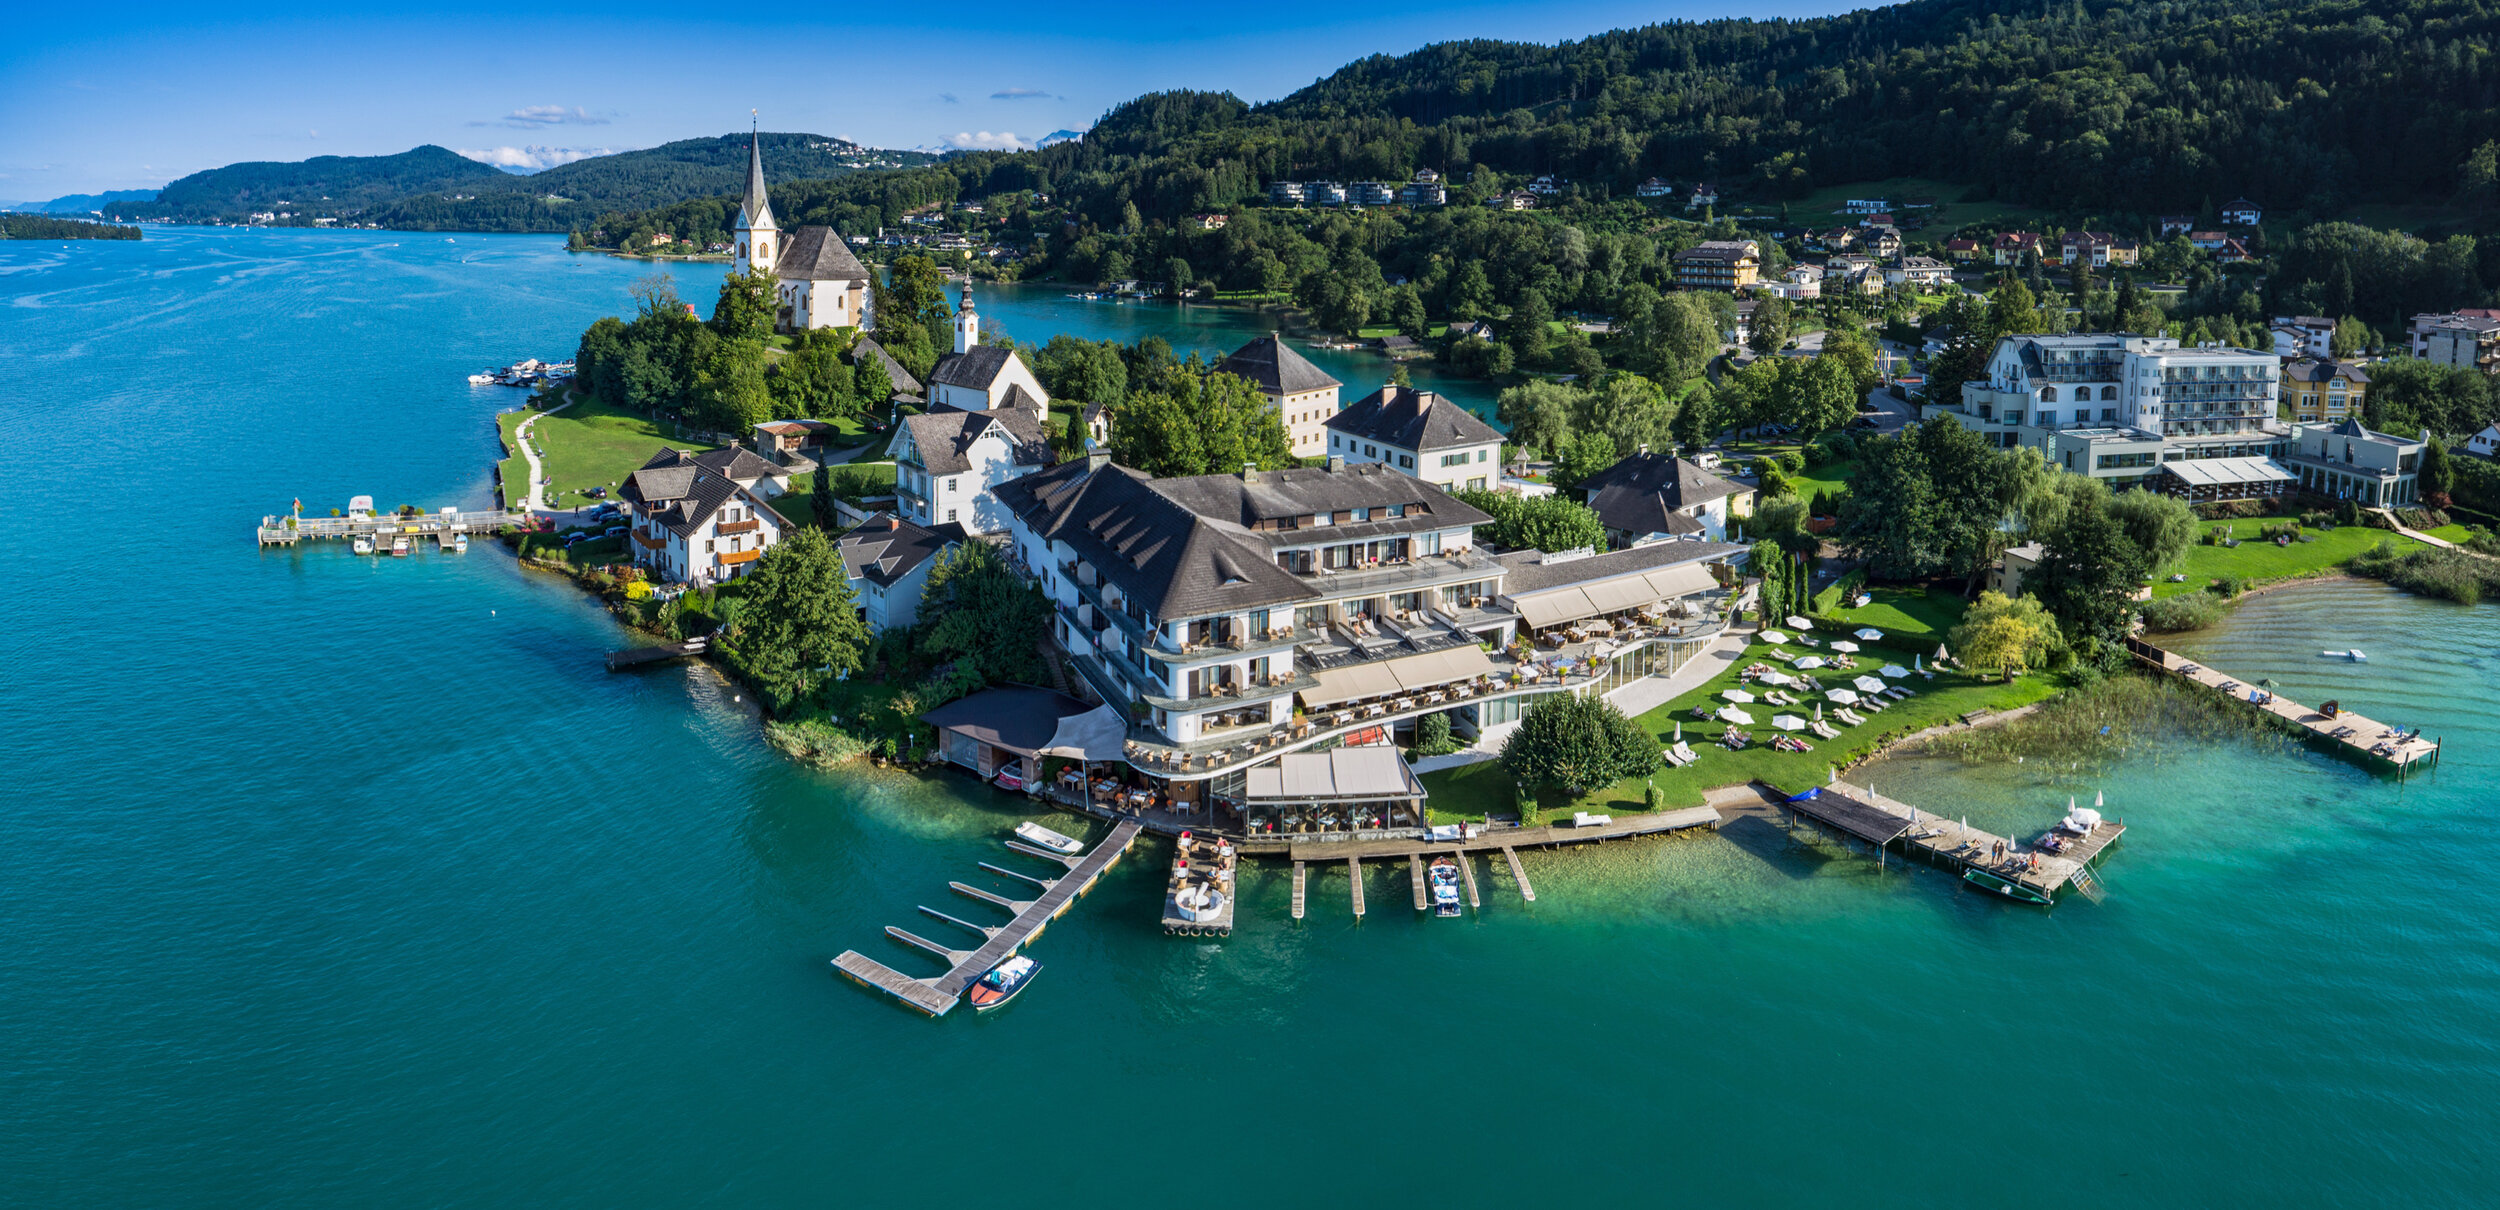 Hotel Linde Worthersee